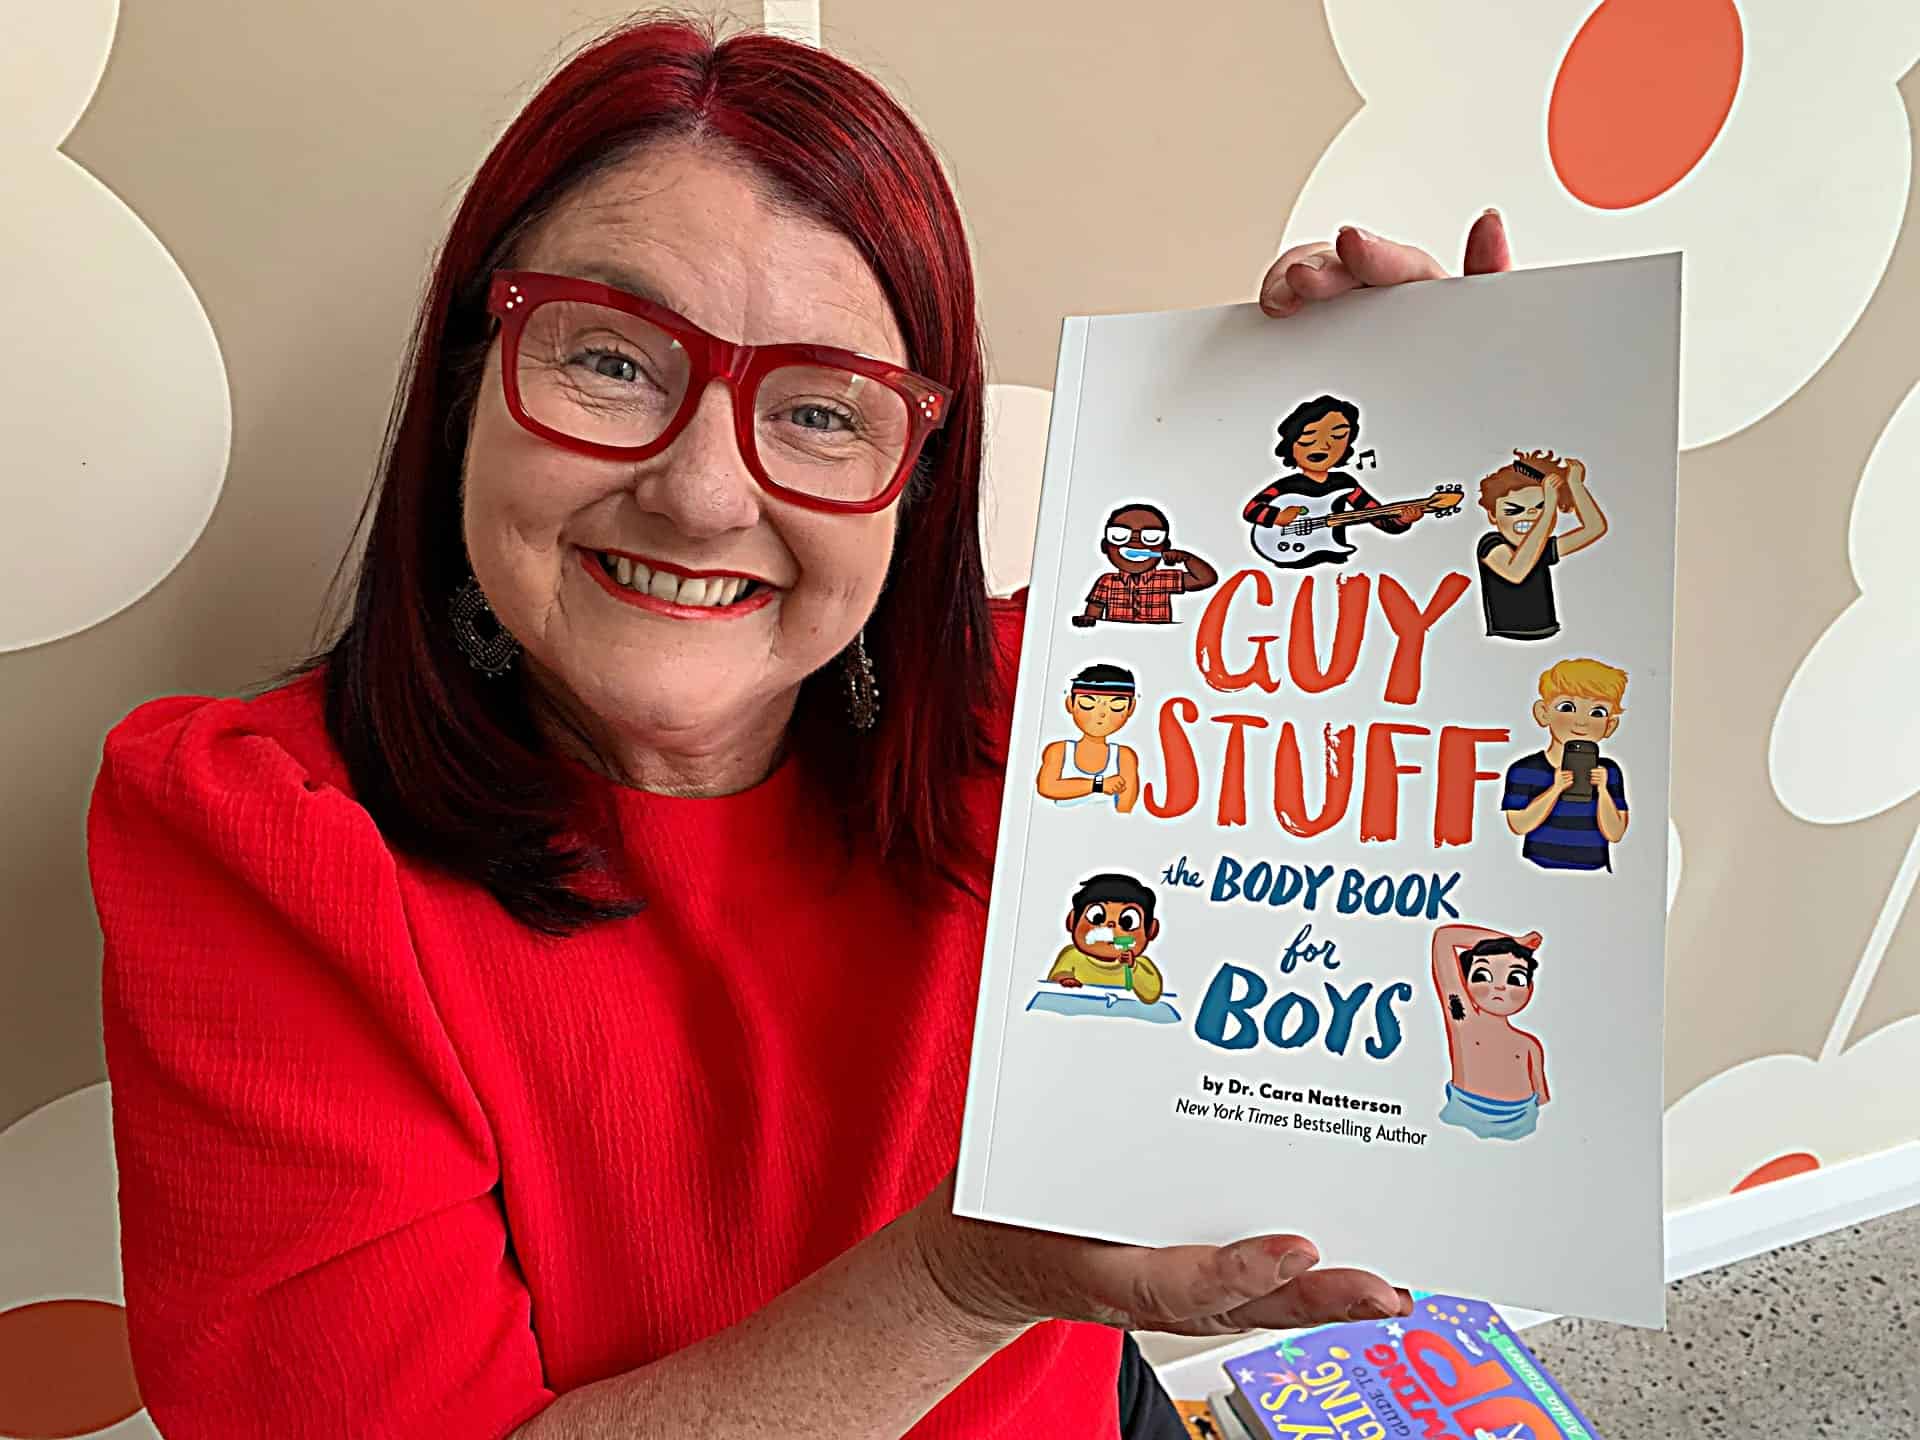 Guy Stuff: The Body Book for Boys - Book review by Rowena Thomas | 'Amazing Me'